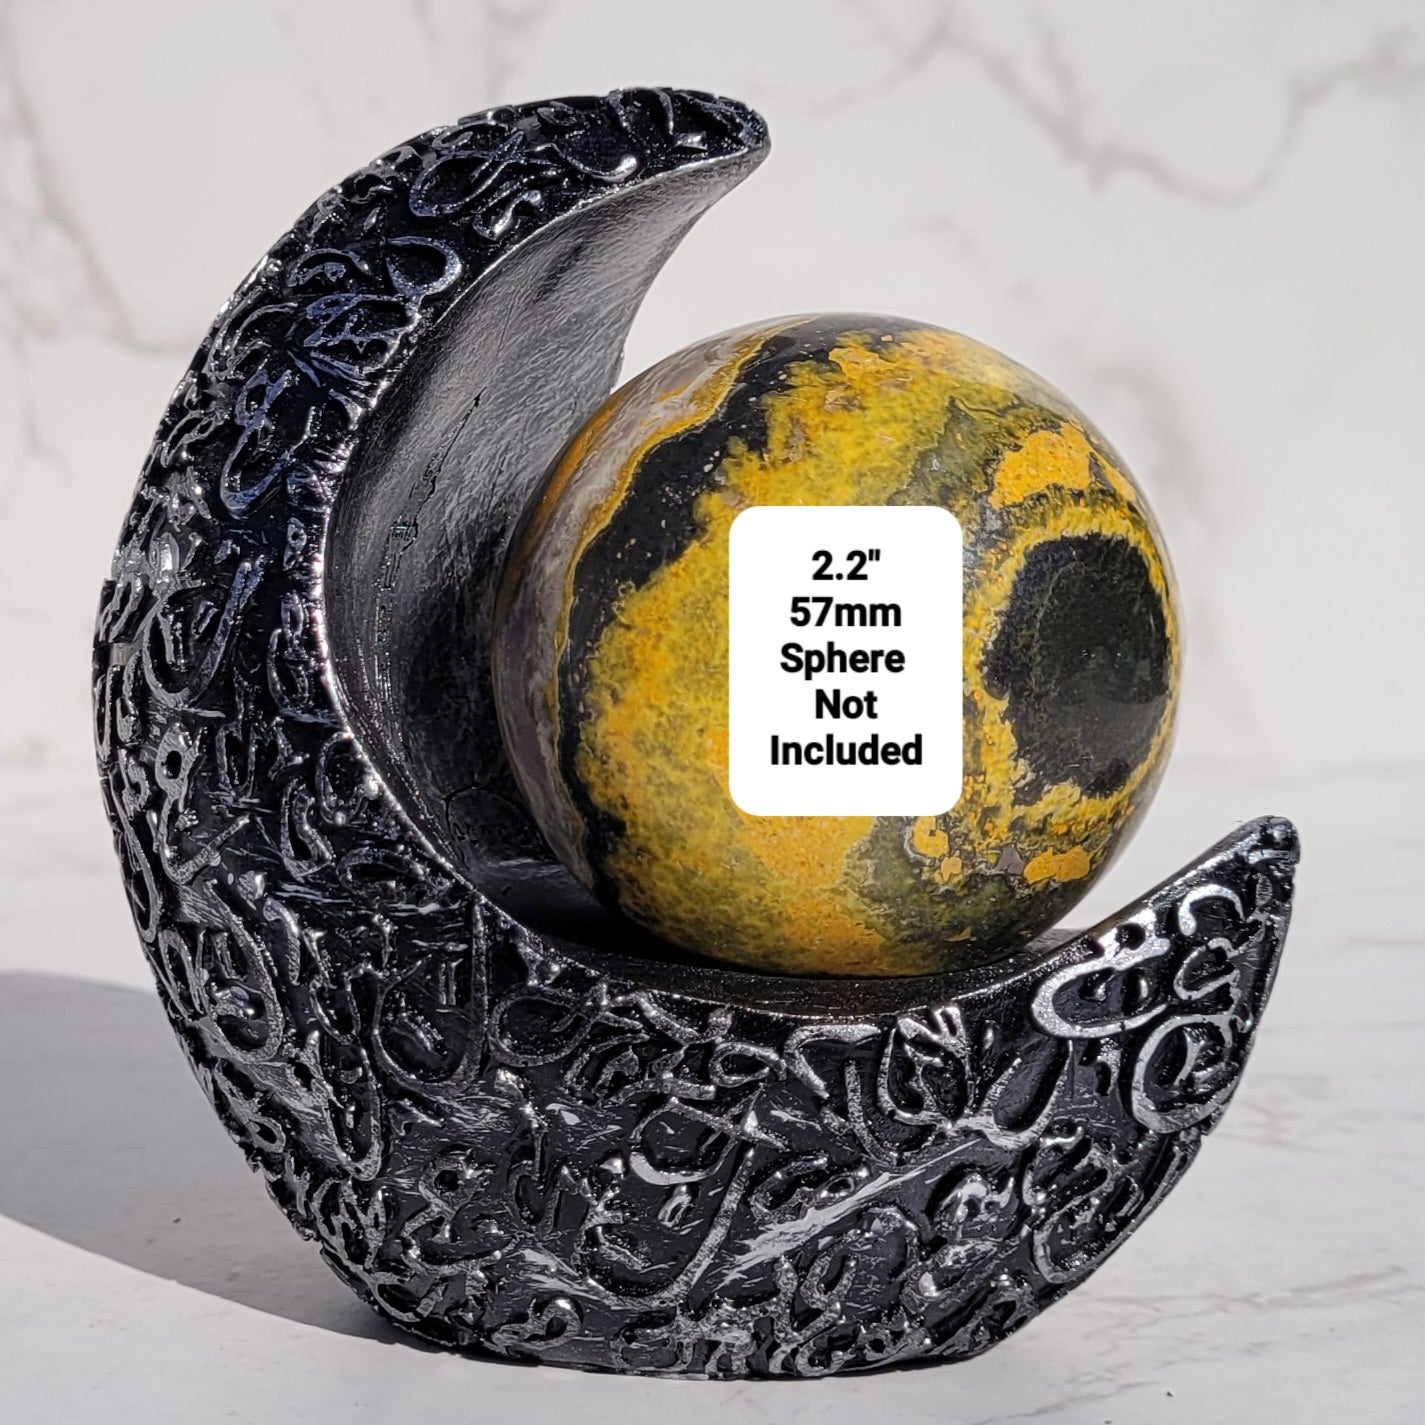 Black Moon Sphere Display Stand with Silver Trim, for Crystal Balls or Eggs 1.3" to 2.6" (35mm to 66mm)